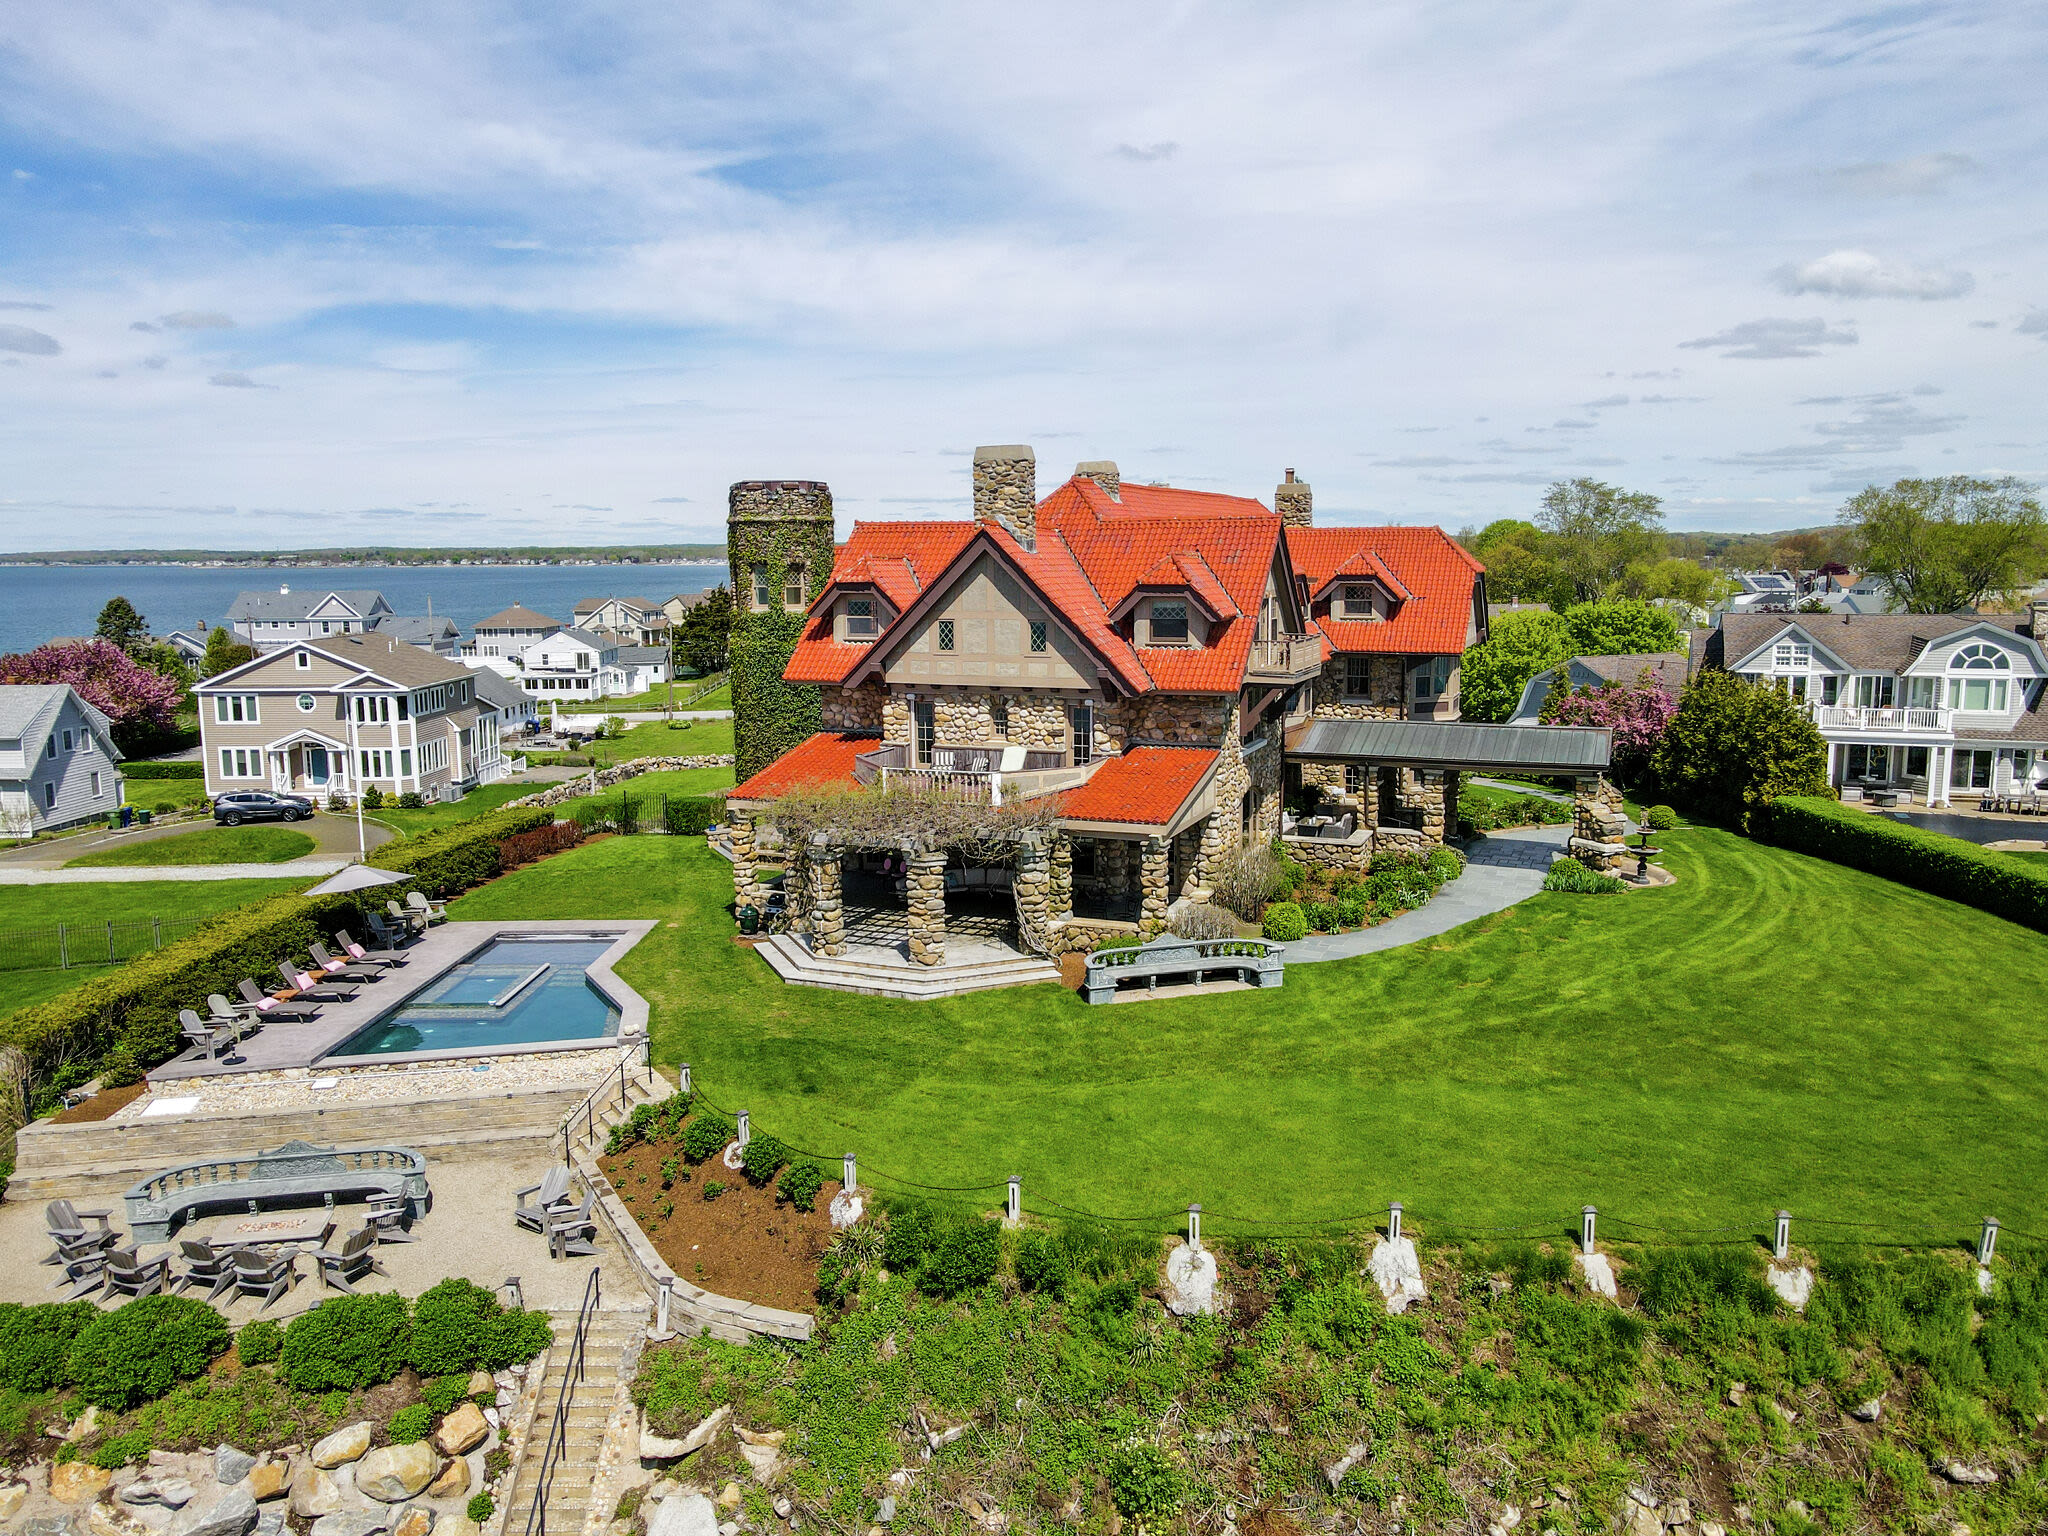 Connecticut's former Ye Castle Inn, visited by Frank Sinatra, listed for $7.7M